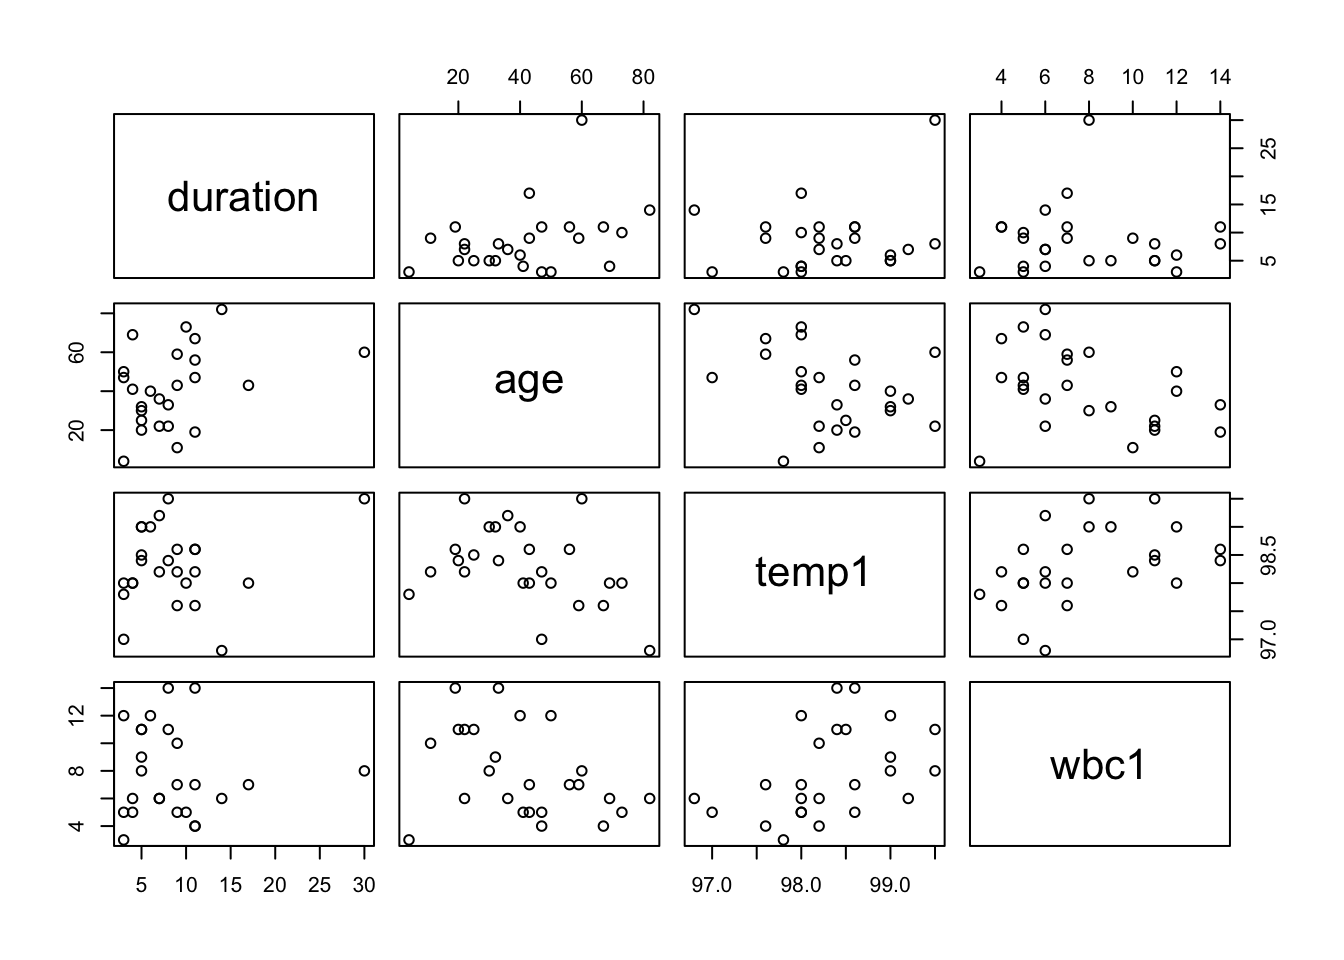 Scatter plots of length of hospital stay against three of the most significant covariates.